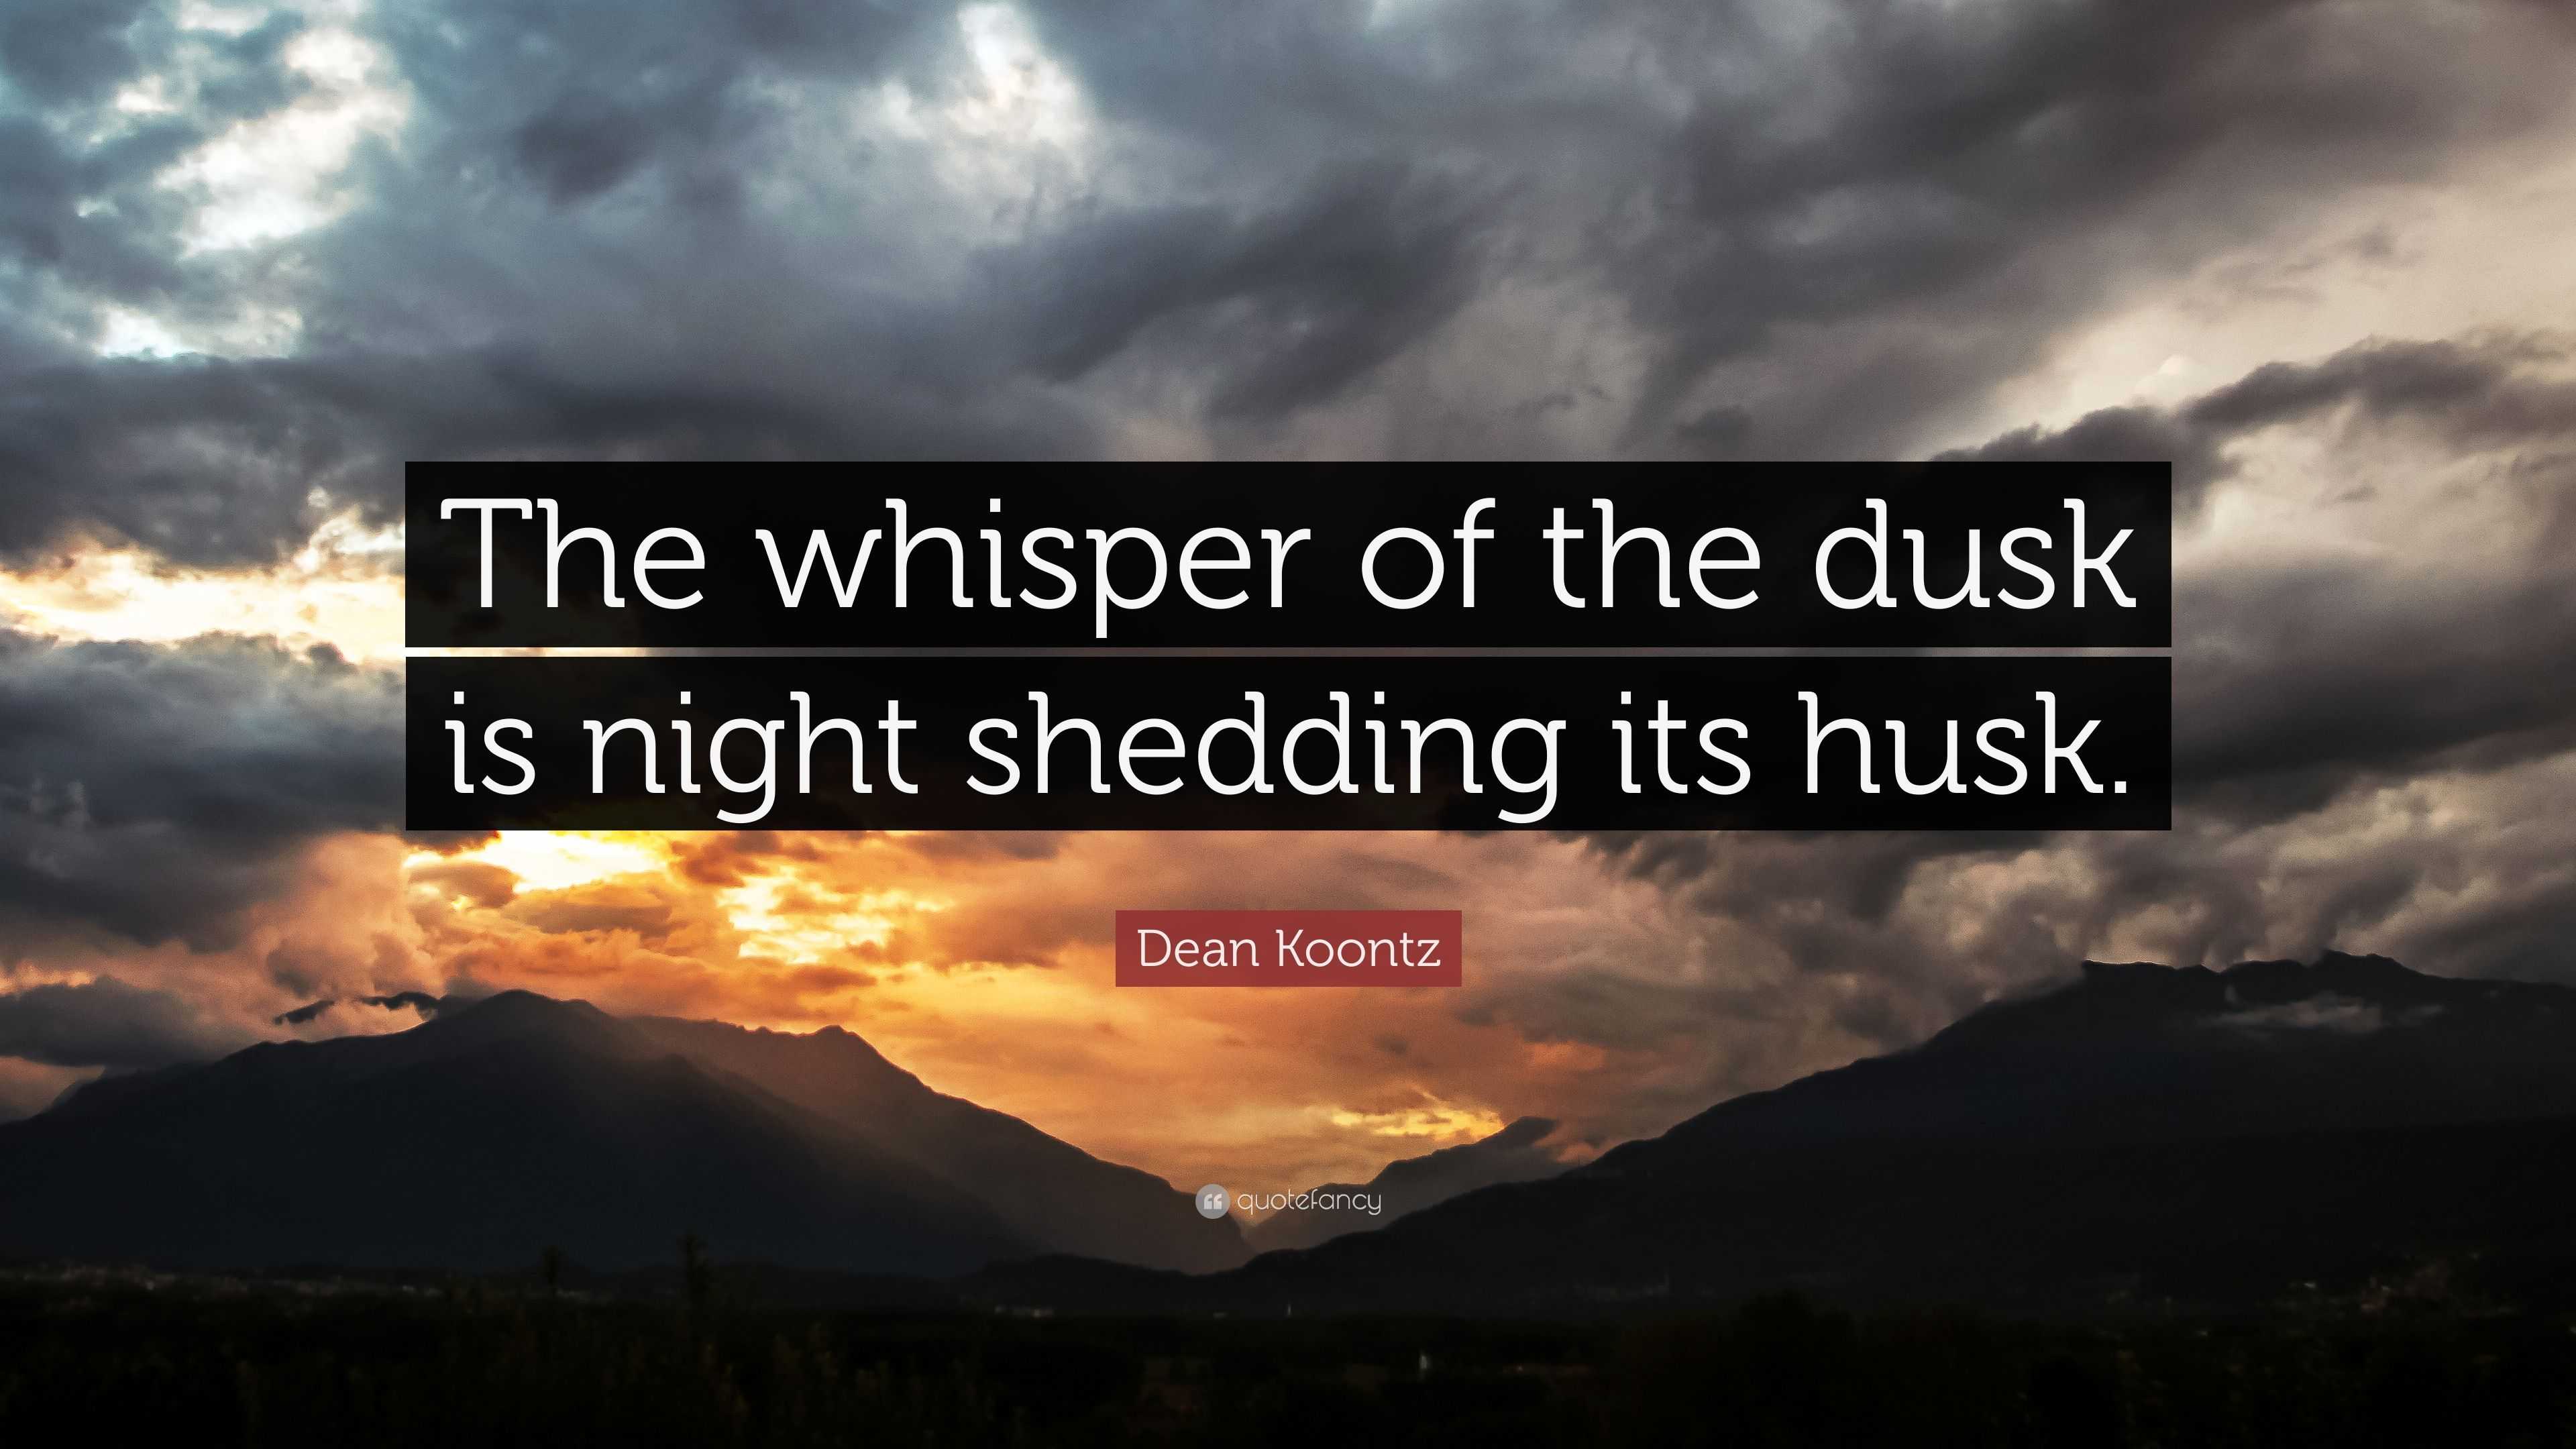 Dean Koontz Quote The Whisper Of The Dusk Is Night Shedding Its Husk 6 Wallpapers Quotefancy